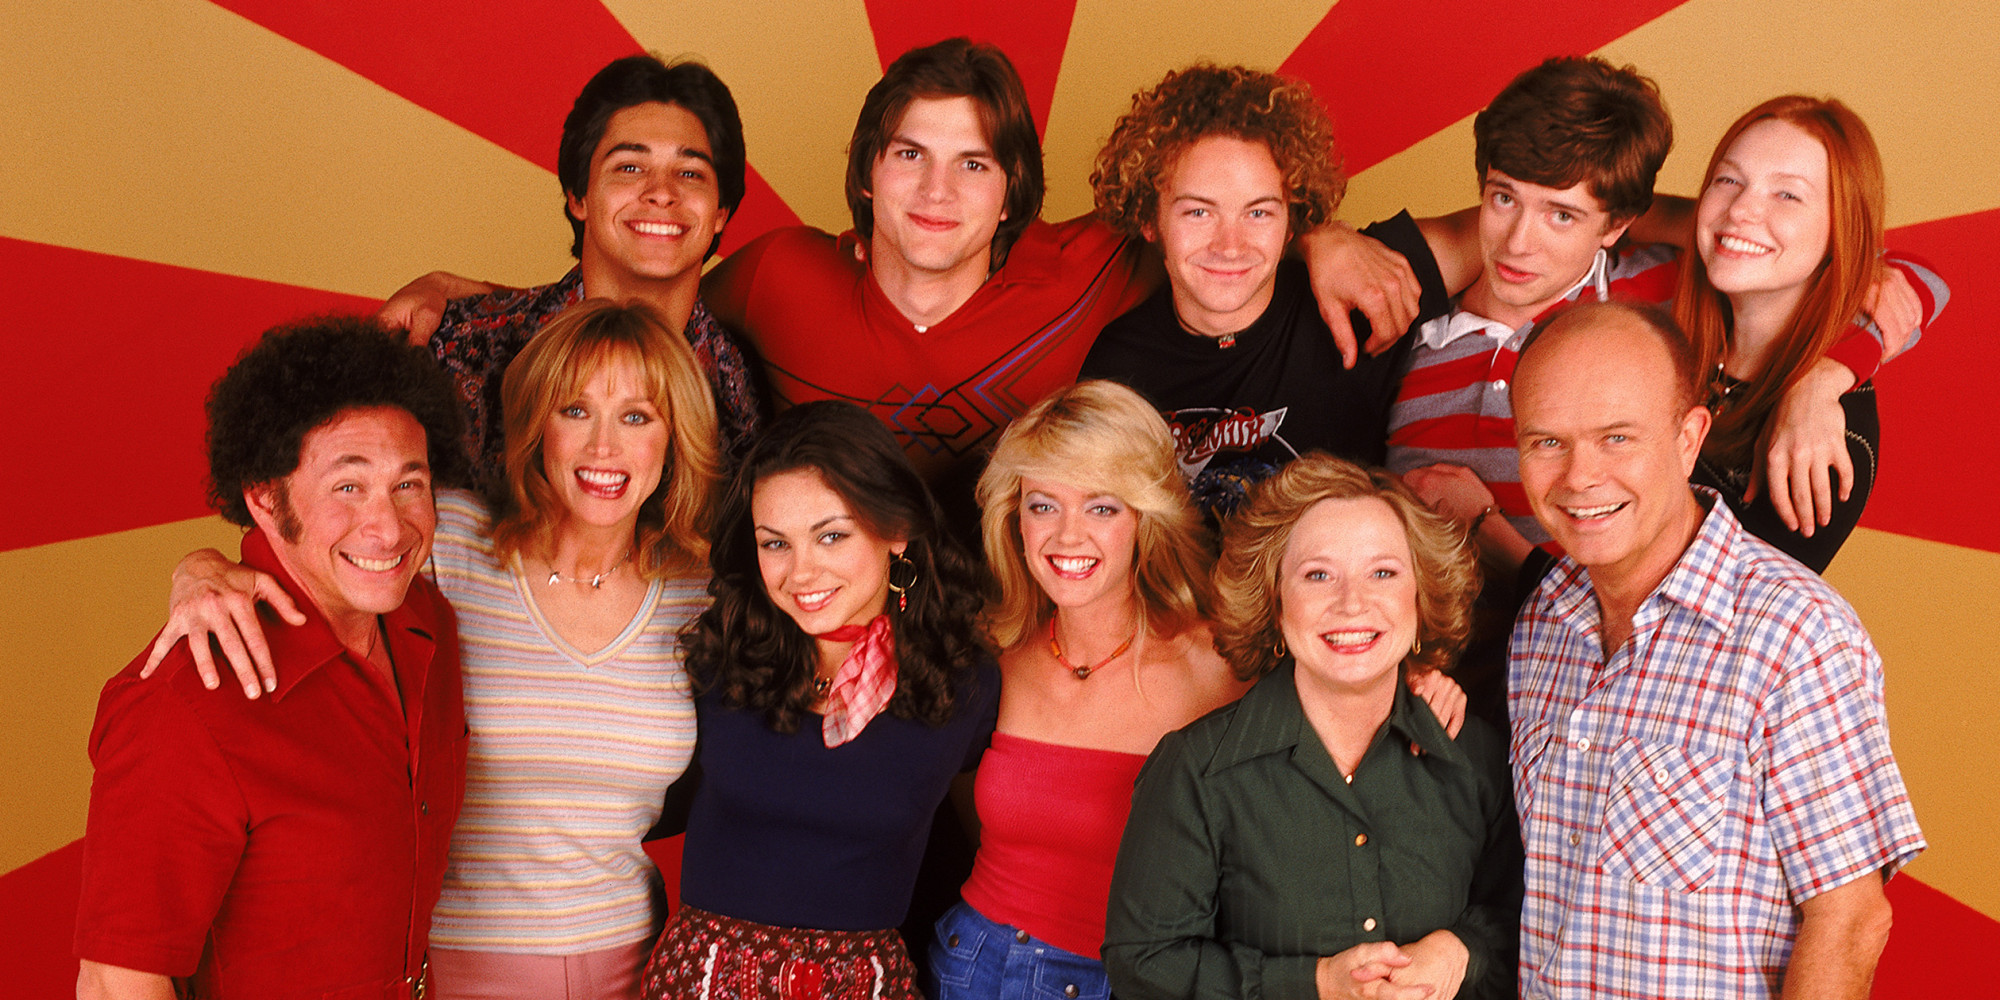 That '70s Show #4